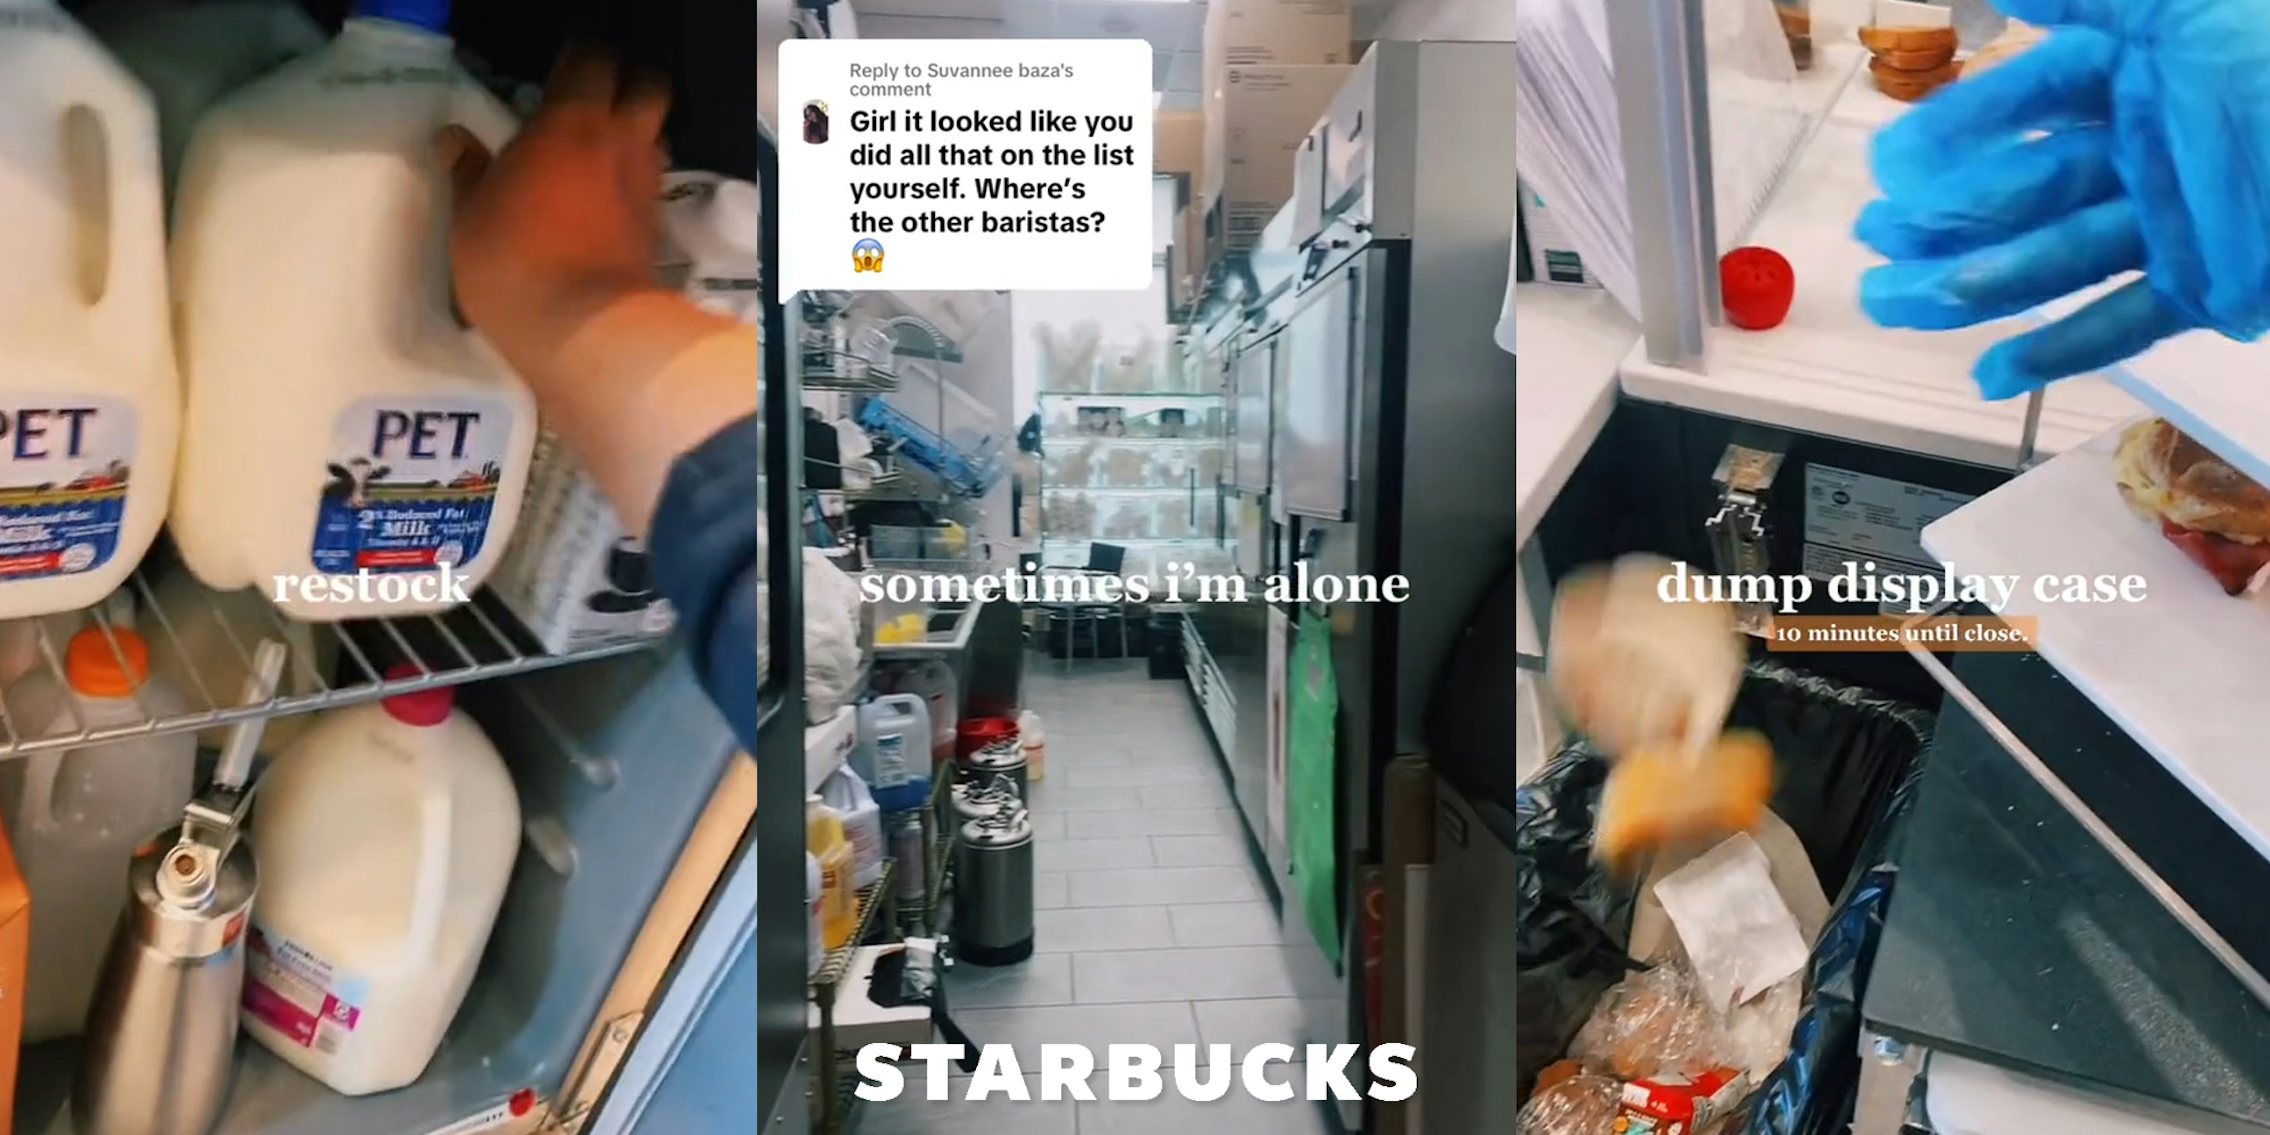 Starbucks barista restocking milk in fridge with caption 'restocking' (l) Starbucks empty interior with caption 'Girl it looked like you did all that on the list yourself. Where's the other baristas?' 'sometimes i'm alone' with Starbucks logo at bottom (c) Starbucks worker cleaning out display case food with caption 'dump display case 10 minutes until close' (r)